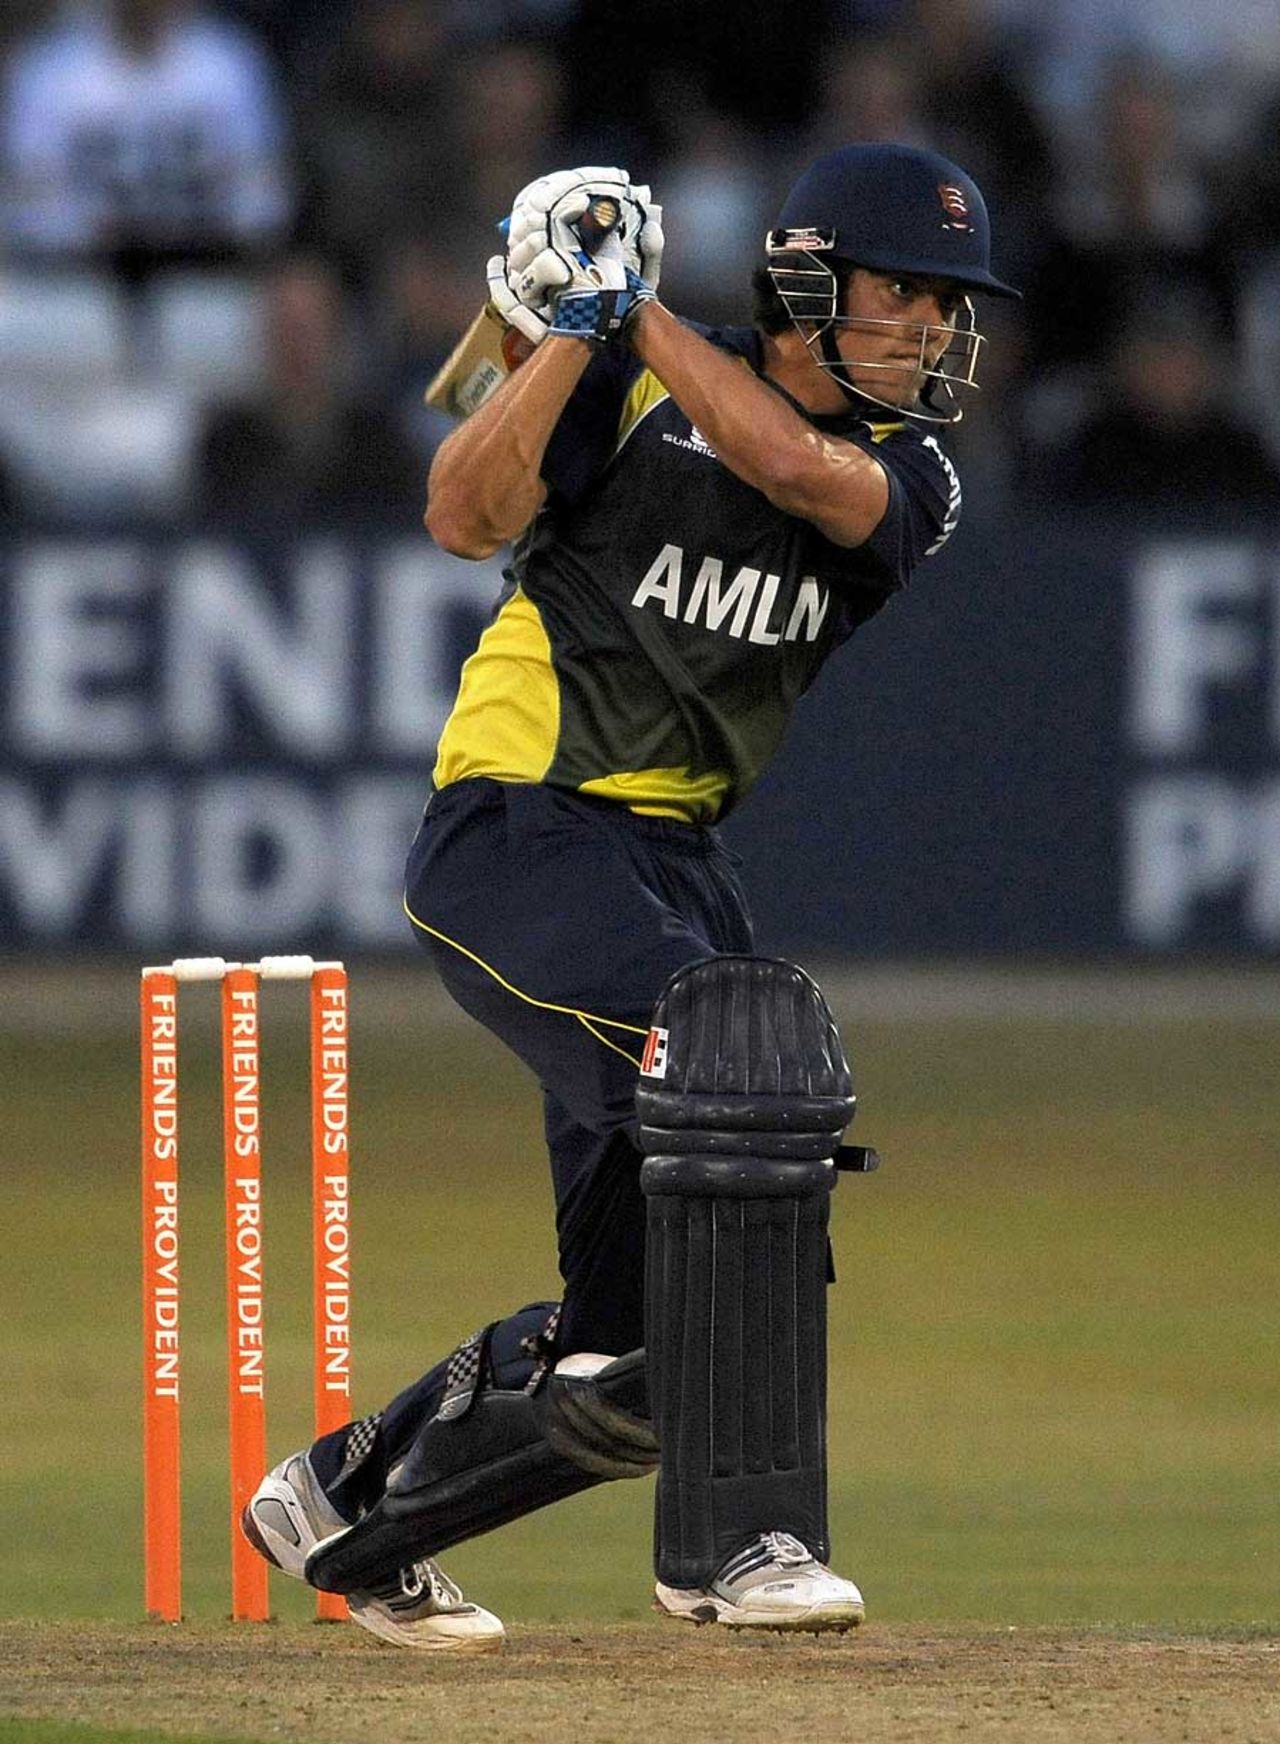 Alastair Cook showed good form with an aggressive 73, Essex v Gloucestershire, Friends Provident t20, Chelmsford, July 15, 2010